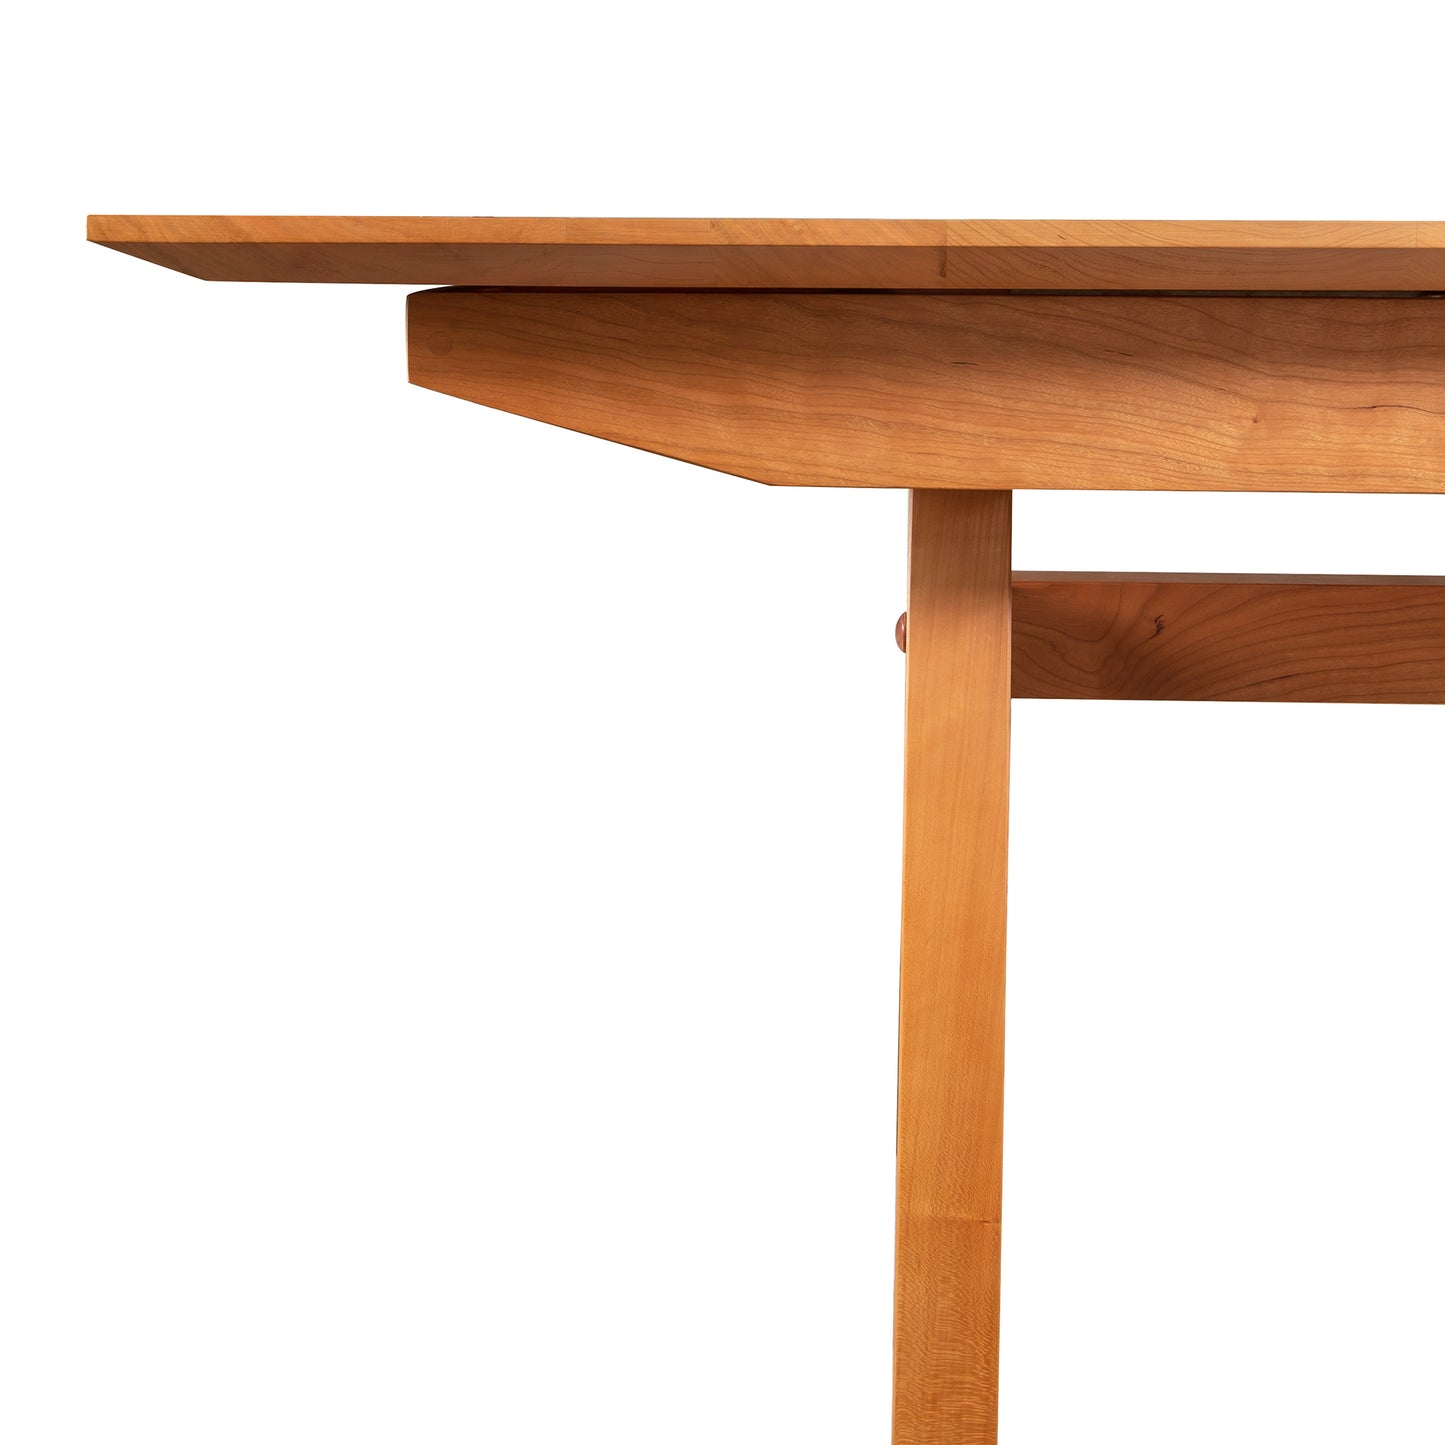 A high-end Lyndon Furniture Vermont Modern Butterfly Extension Table with a wooden top and legs.